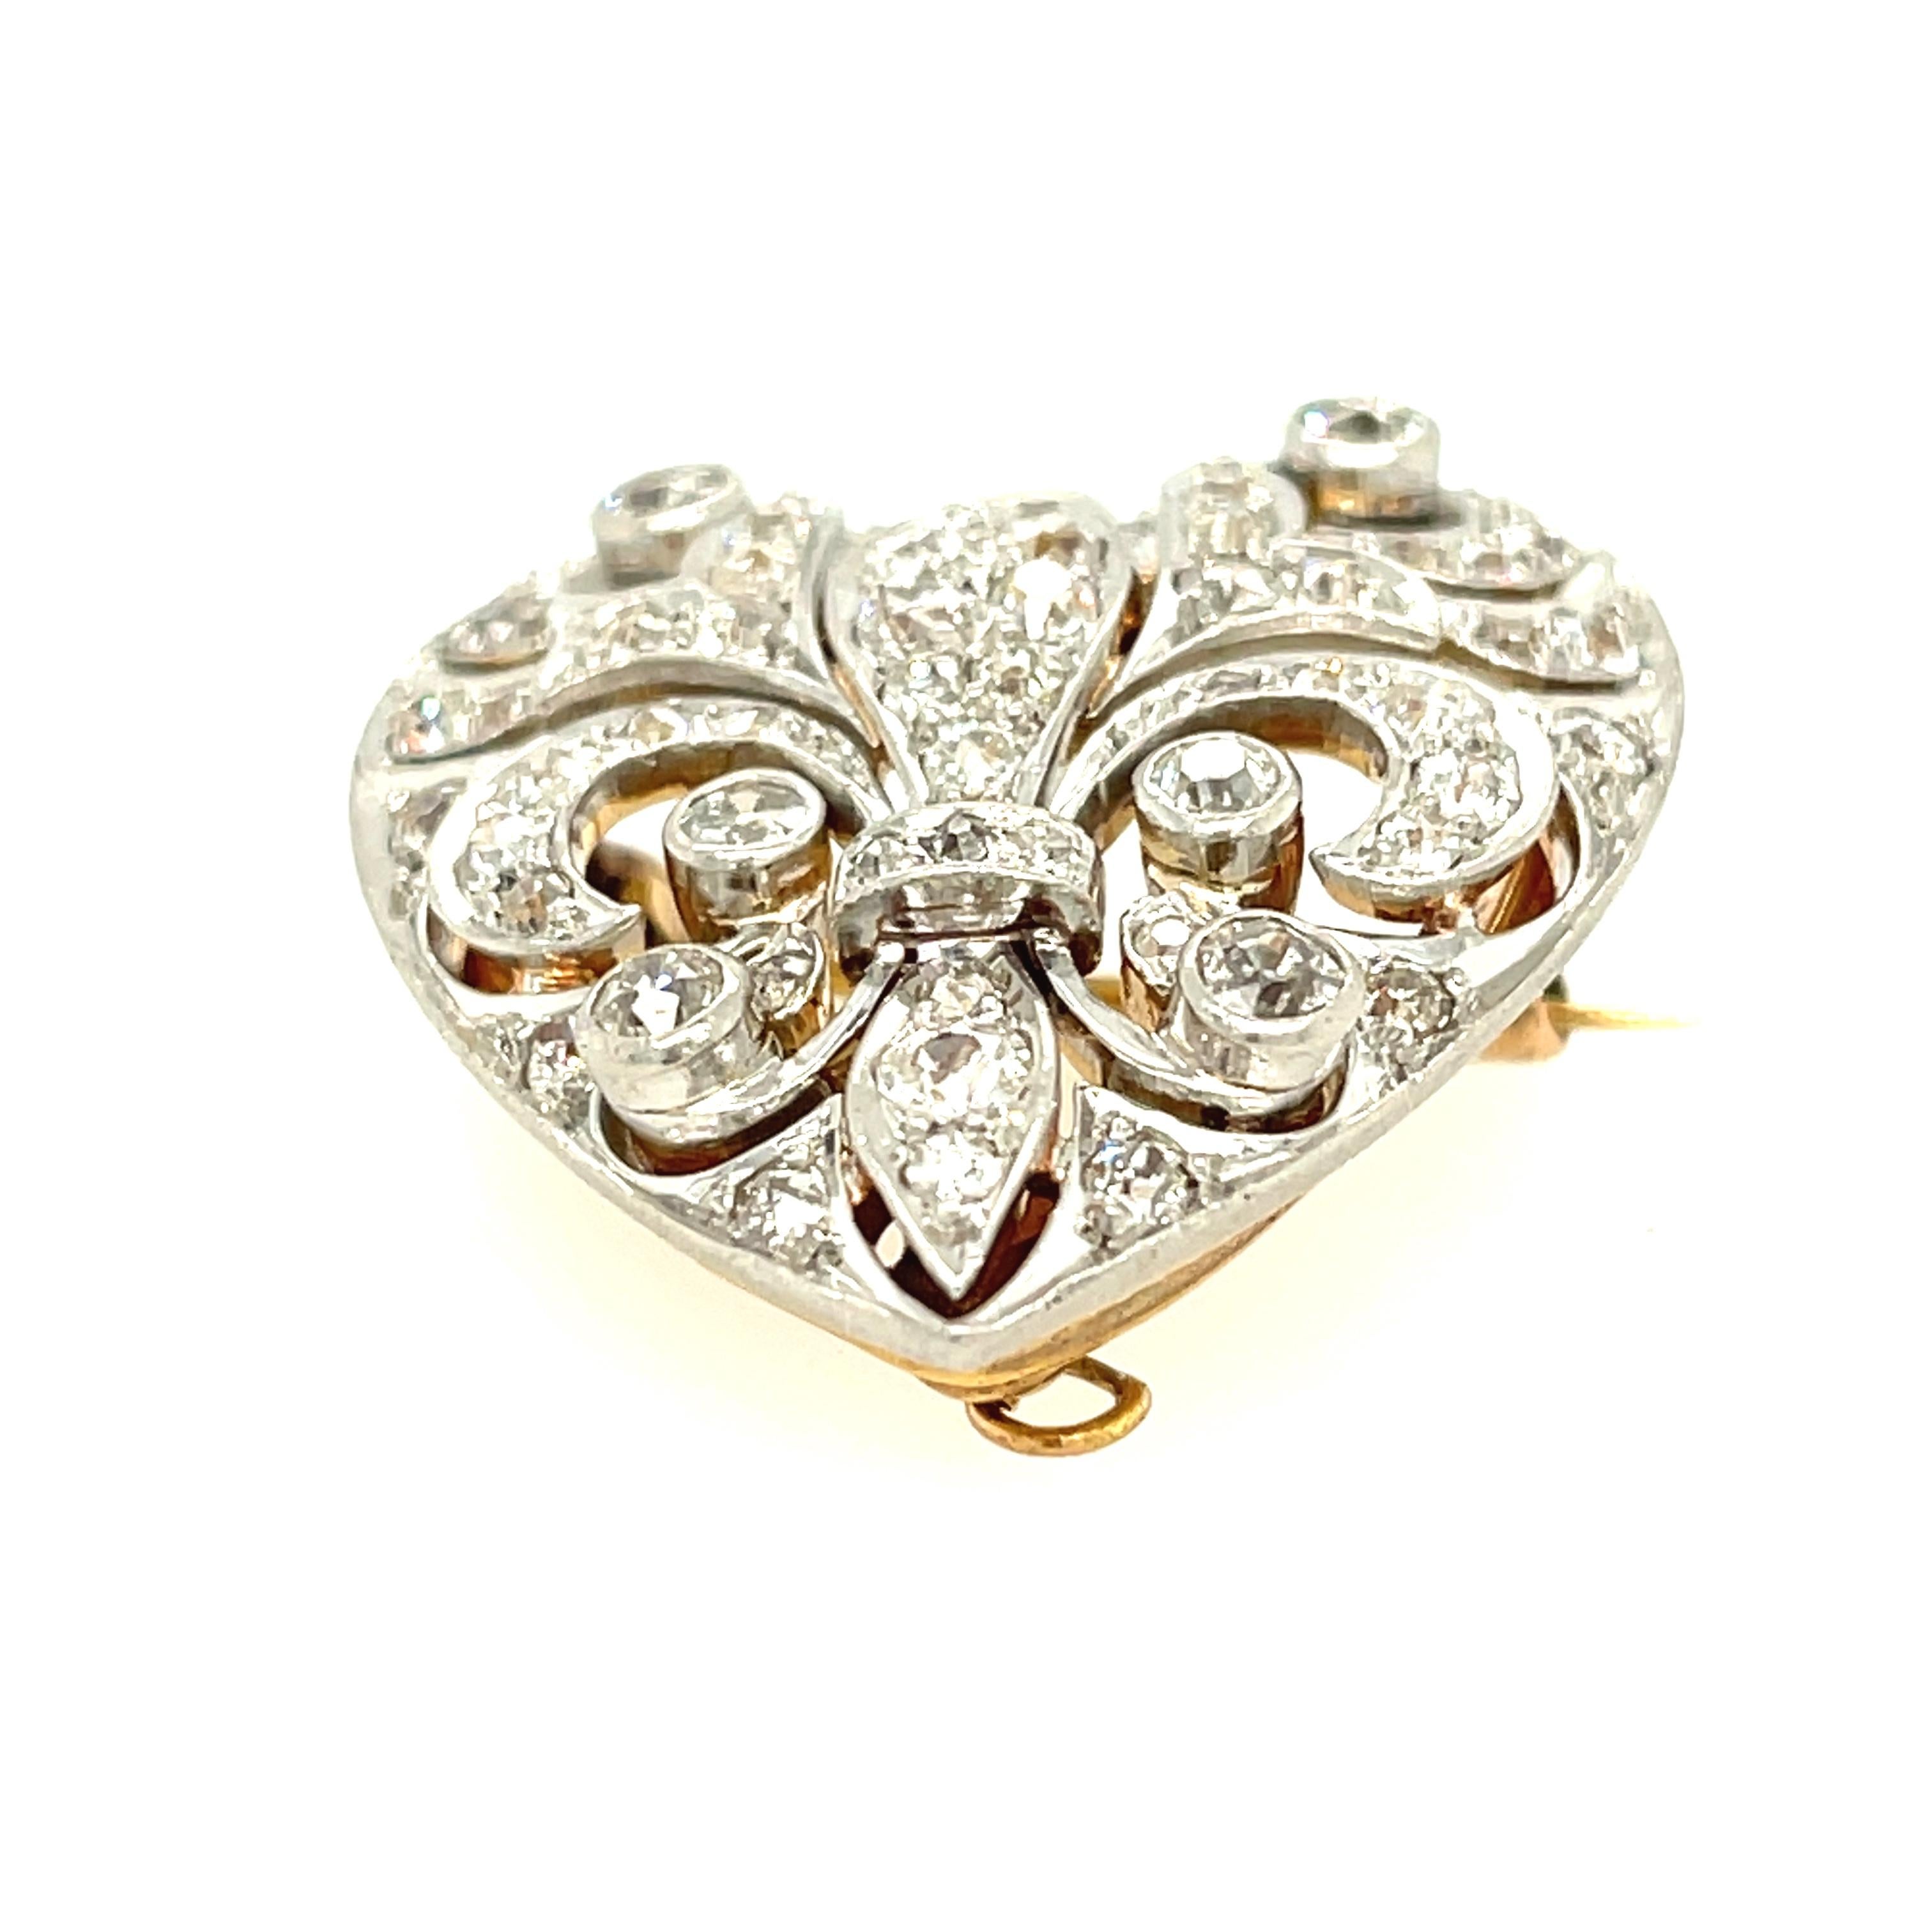 A pretty antique Edwardian platinum topped gold diamond heart brooch, circa 1910. The brooch is removable and there is a bale that can be lifted to wear the heart as a pendant. The heart has diamonds set in the shape of a fleur di lys. The unique